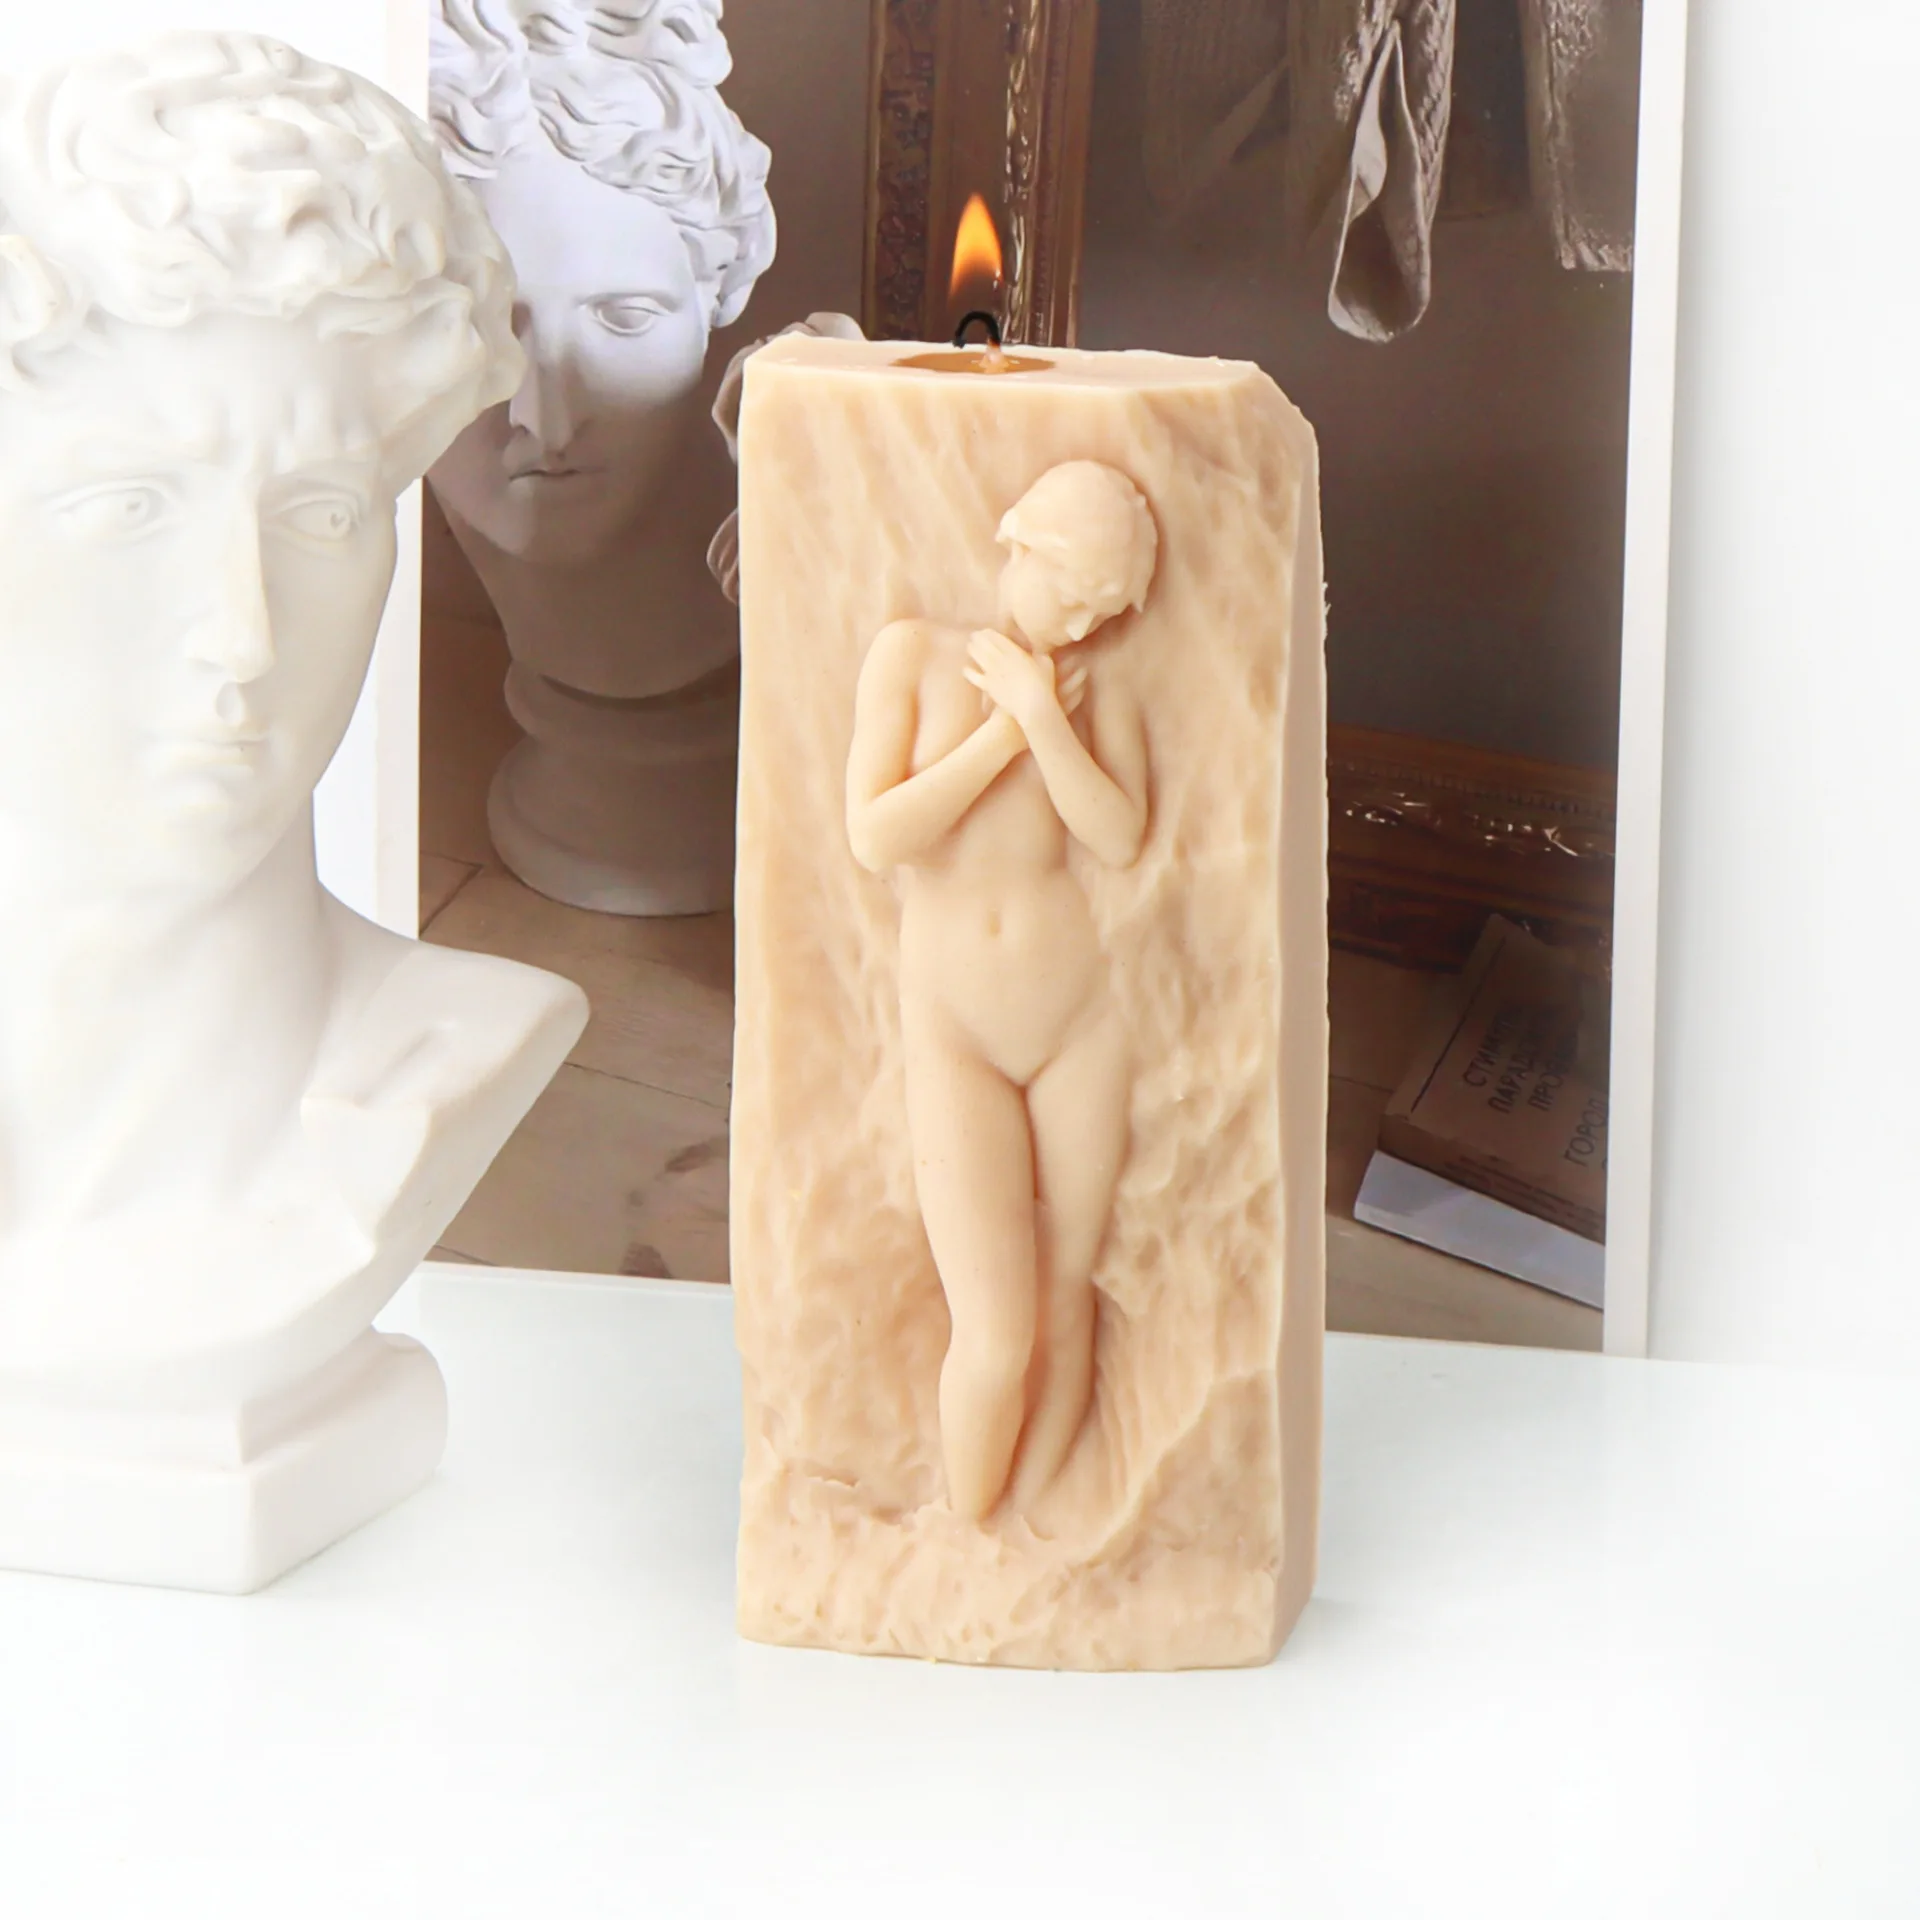 

Portrait Relief Girl Candle Silicone Mold For Festive And Romantic Decoration Gypsum form Homemade Handicraft Gift Making Kitche